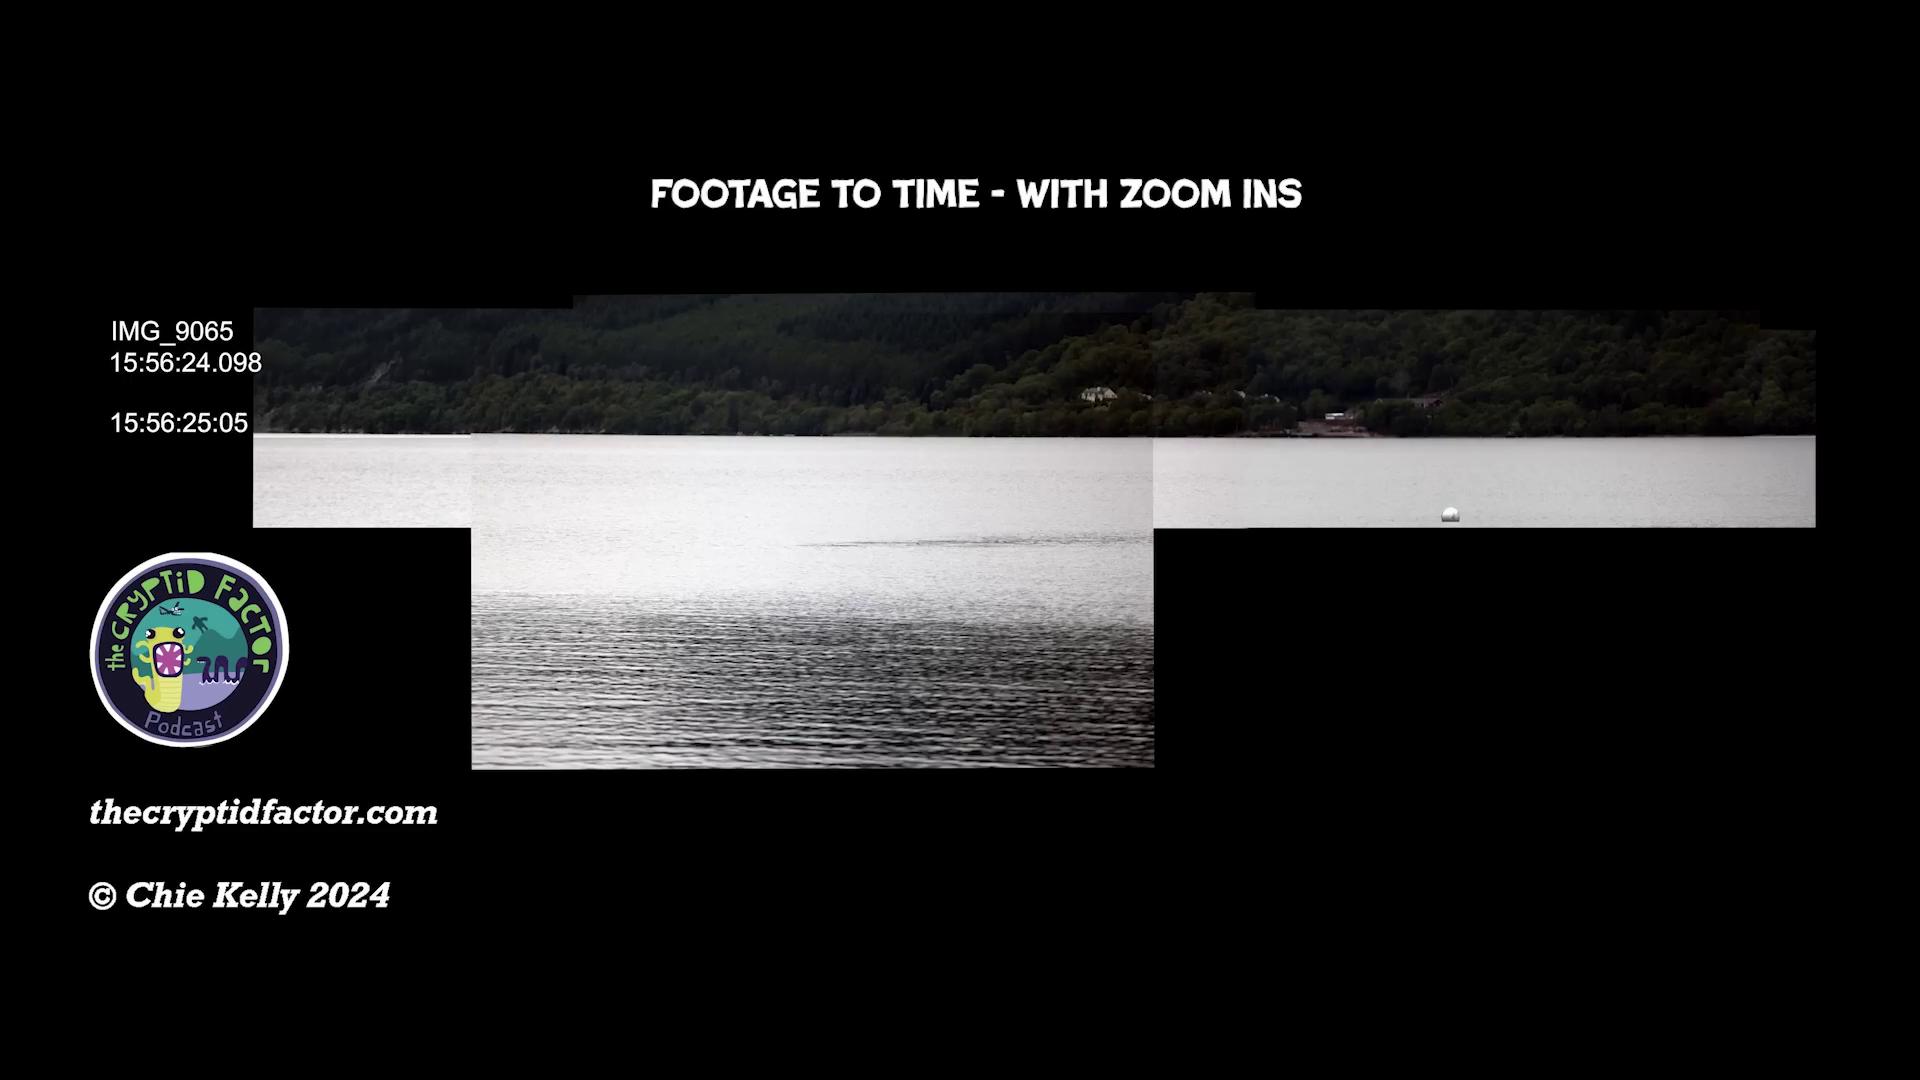 Loch Ness Monster Exclusive Footage - Photo Sequence